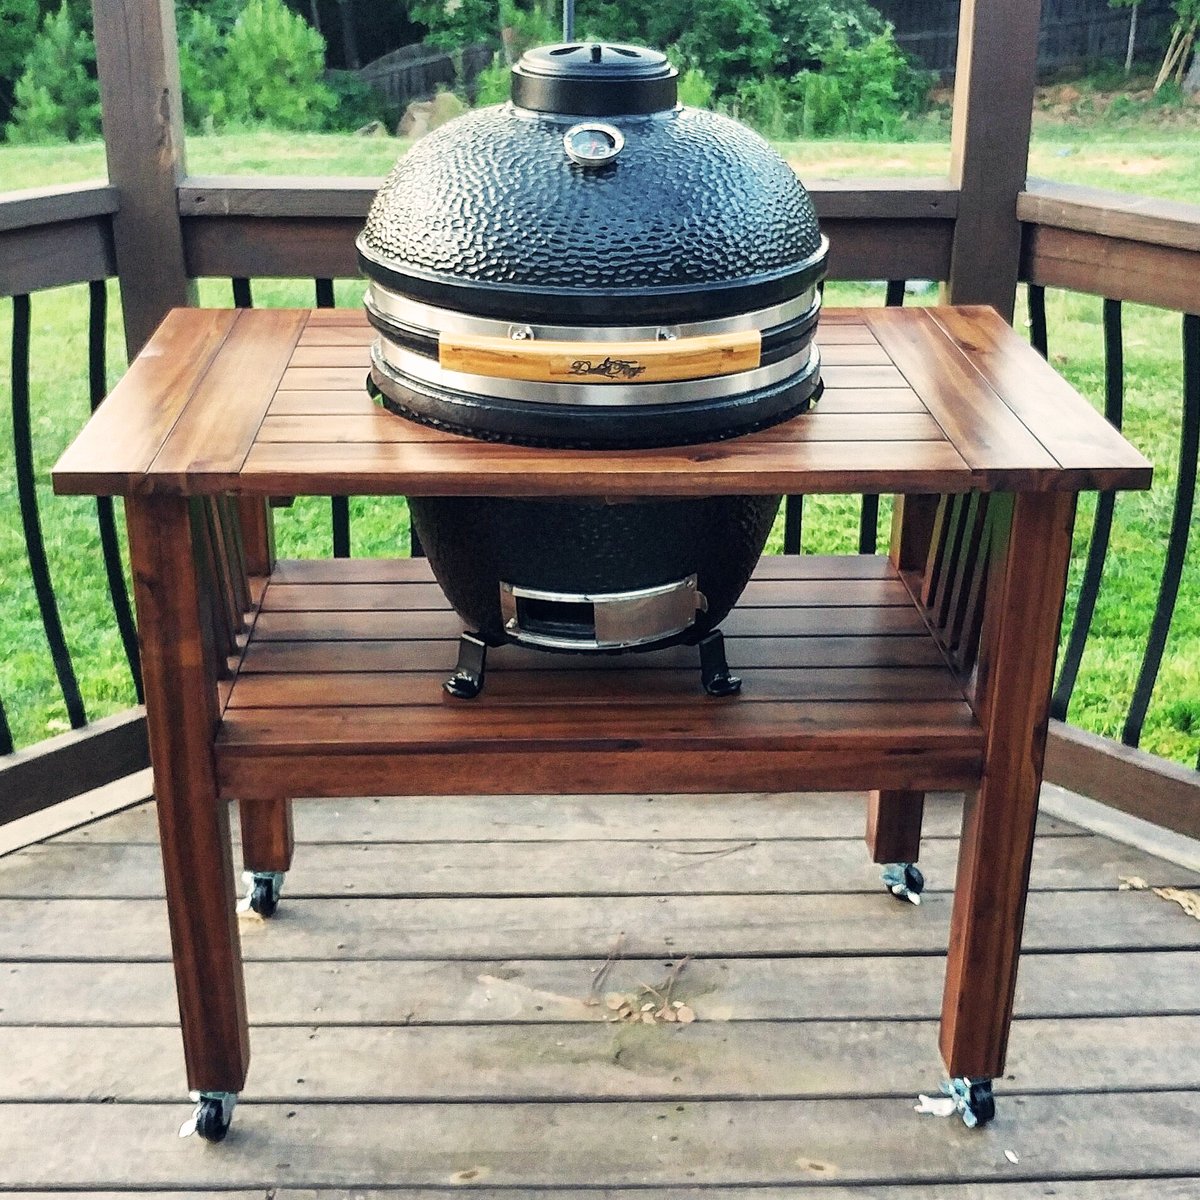 Grilling with a Duluth Forge Kamado Grill is a great way to add smokey flavor to whatever you'd like! Browse our selection of Kamado Grills today. 🔥:bit.ly/2GAmx1d